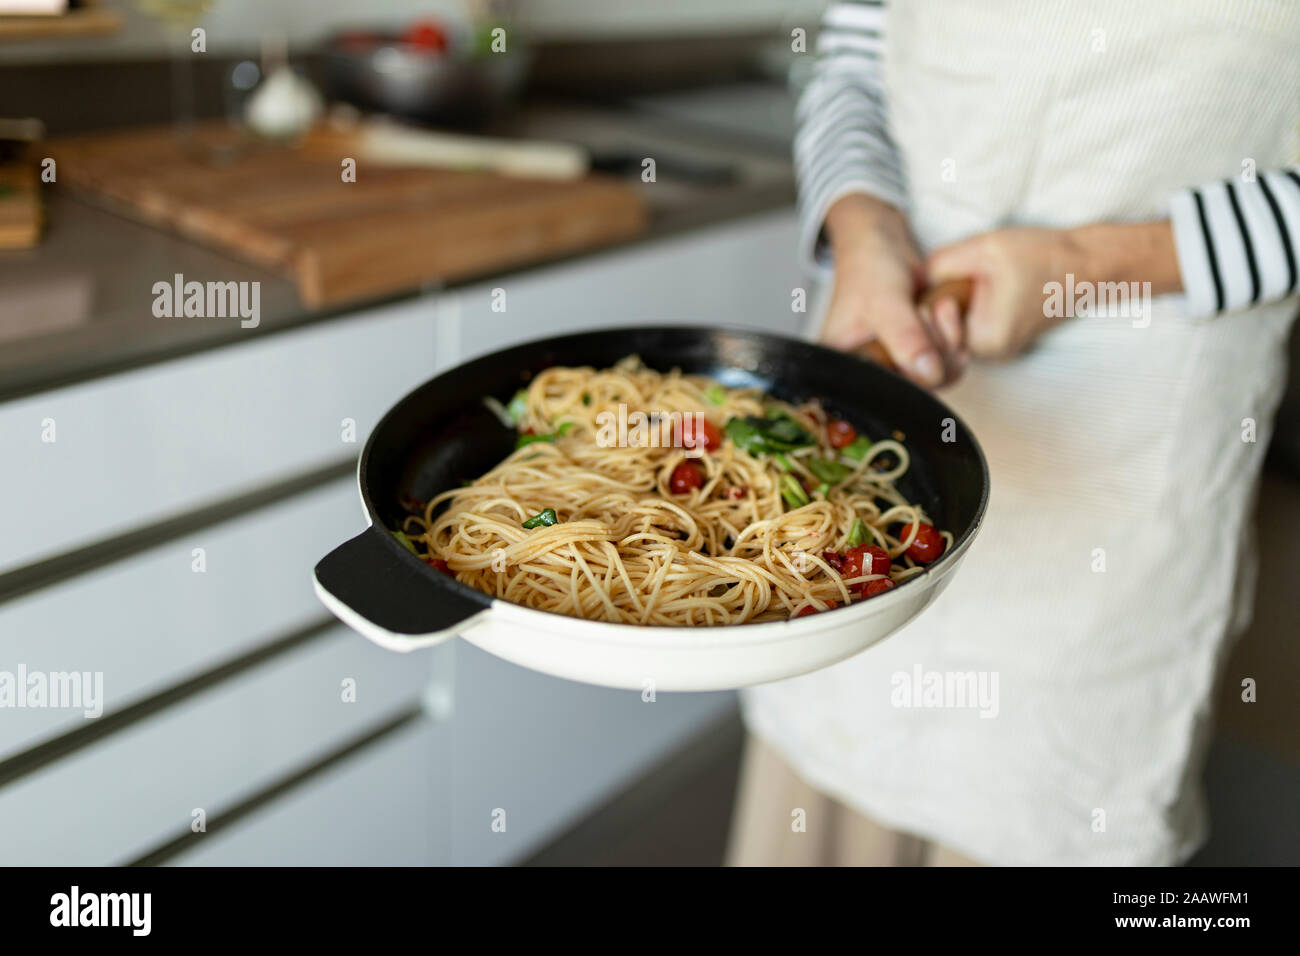 Close-up of woman holding a pan with pasta dish in kitchen at home Stock Photo